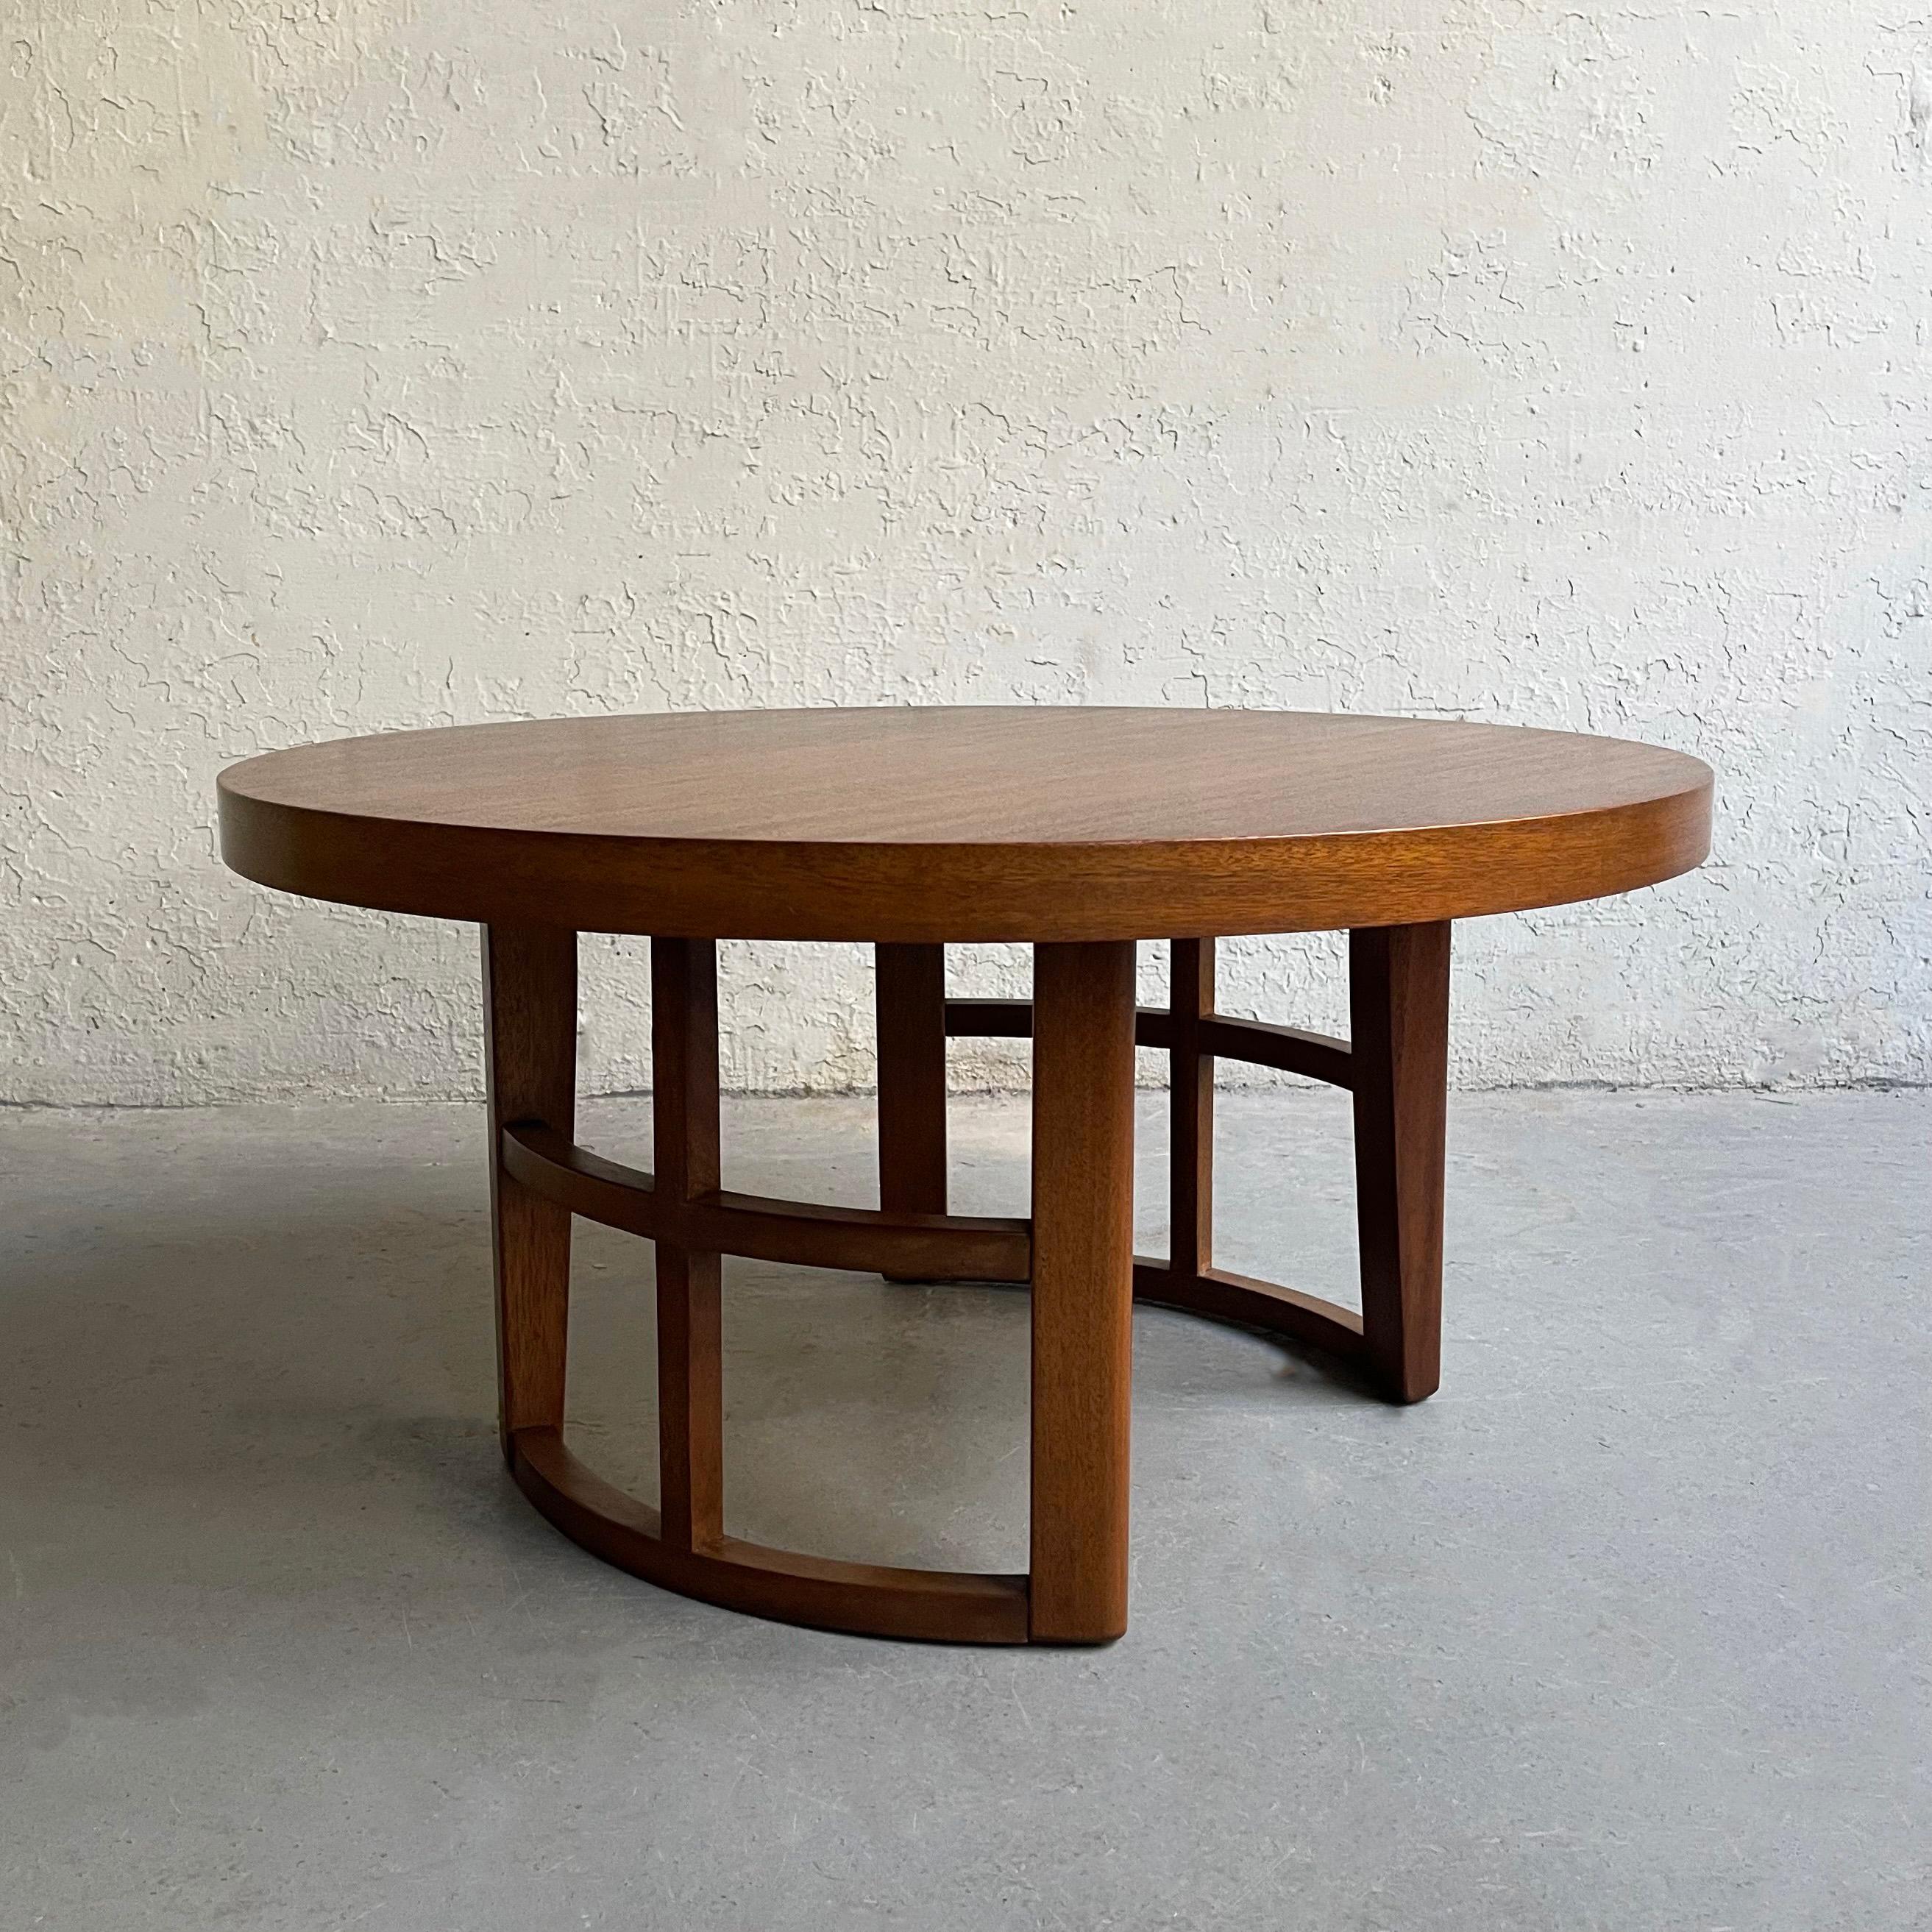 Mid-Century Modern, 30 inch round walnut coffee or side table features a curved lattice pedestal base. A modern take on craftsman style.